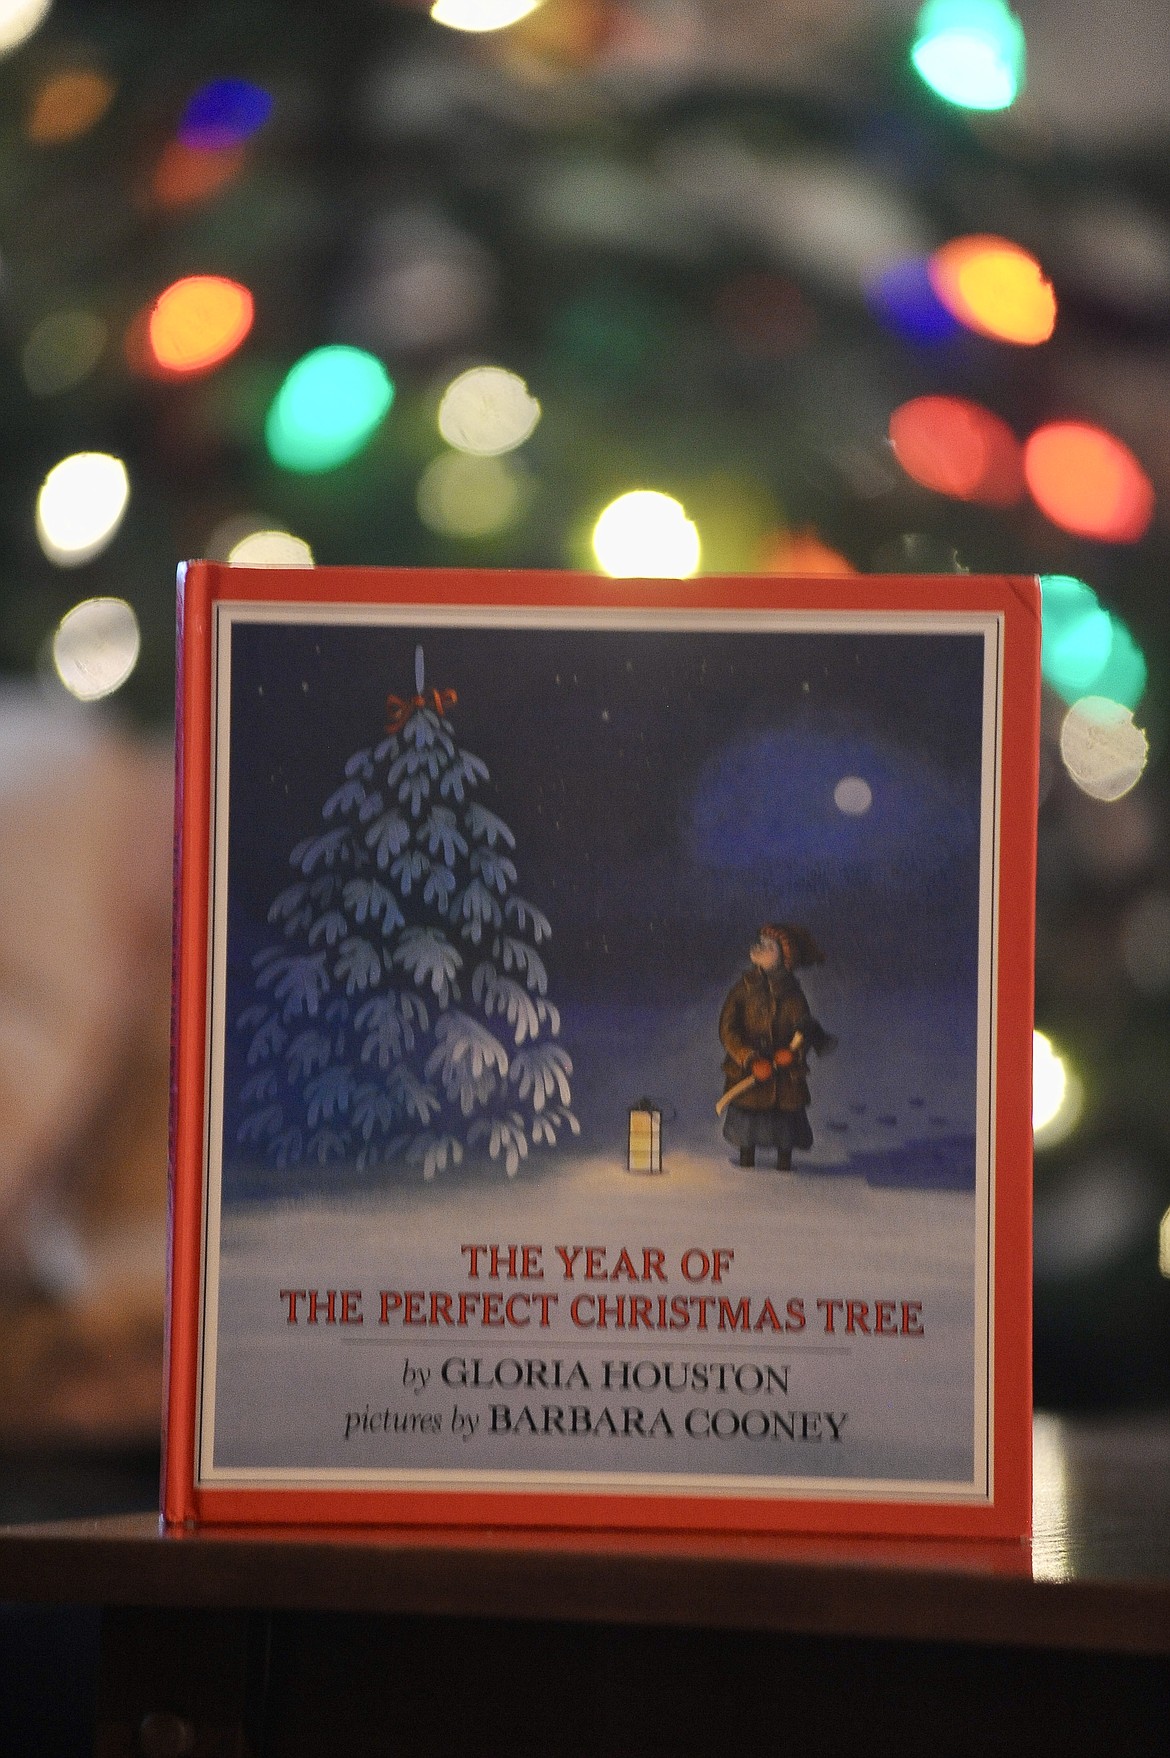 "The Year of the Perfect Christmas Tree," written by Gloria Houston and illustrated by Barbara Cooney.